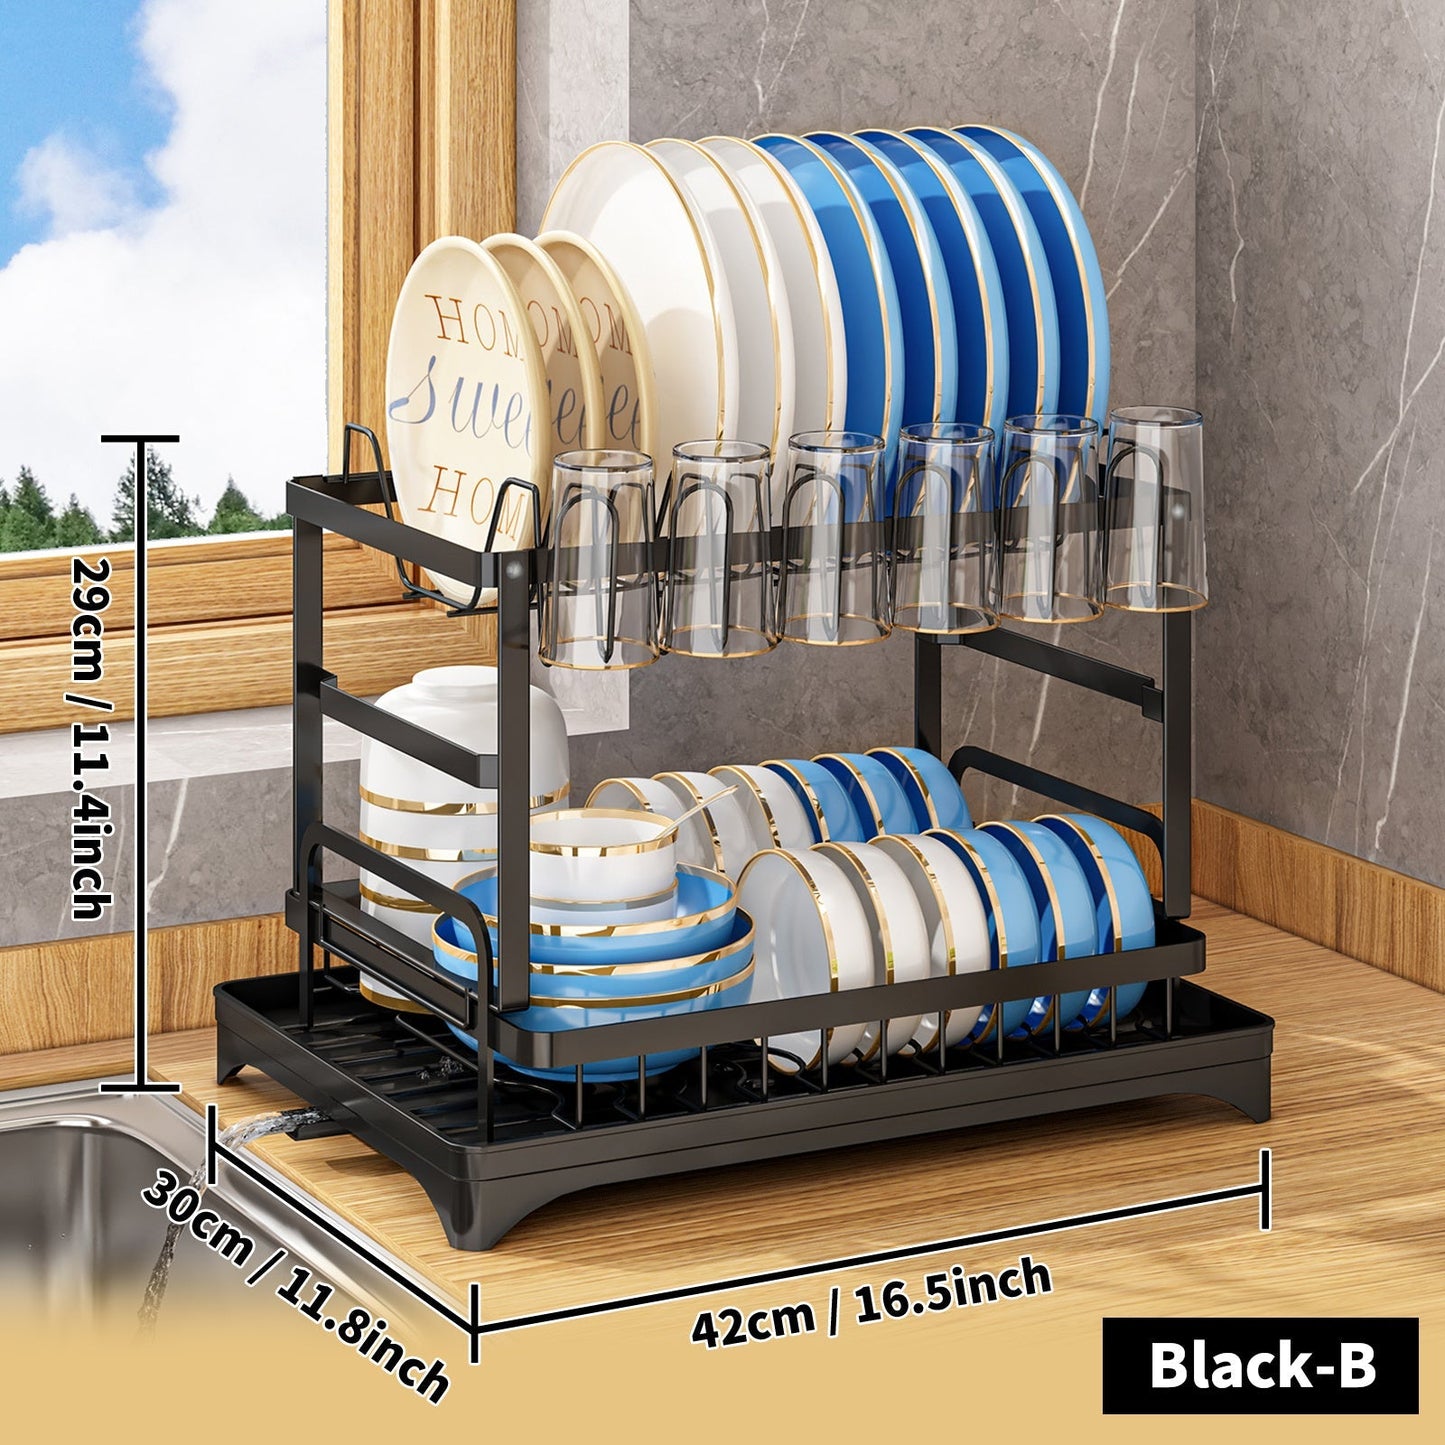 1 Set Dish Rack, 2 Tier Dish Drying Rack, Rustproof Kitchen Dish Drying Rack With Drainboard And Utensil Holder For Kitchen Countertop, Kitchen Accessories